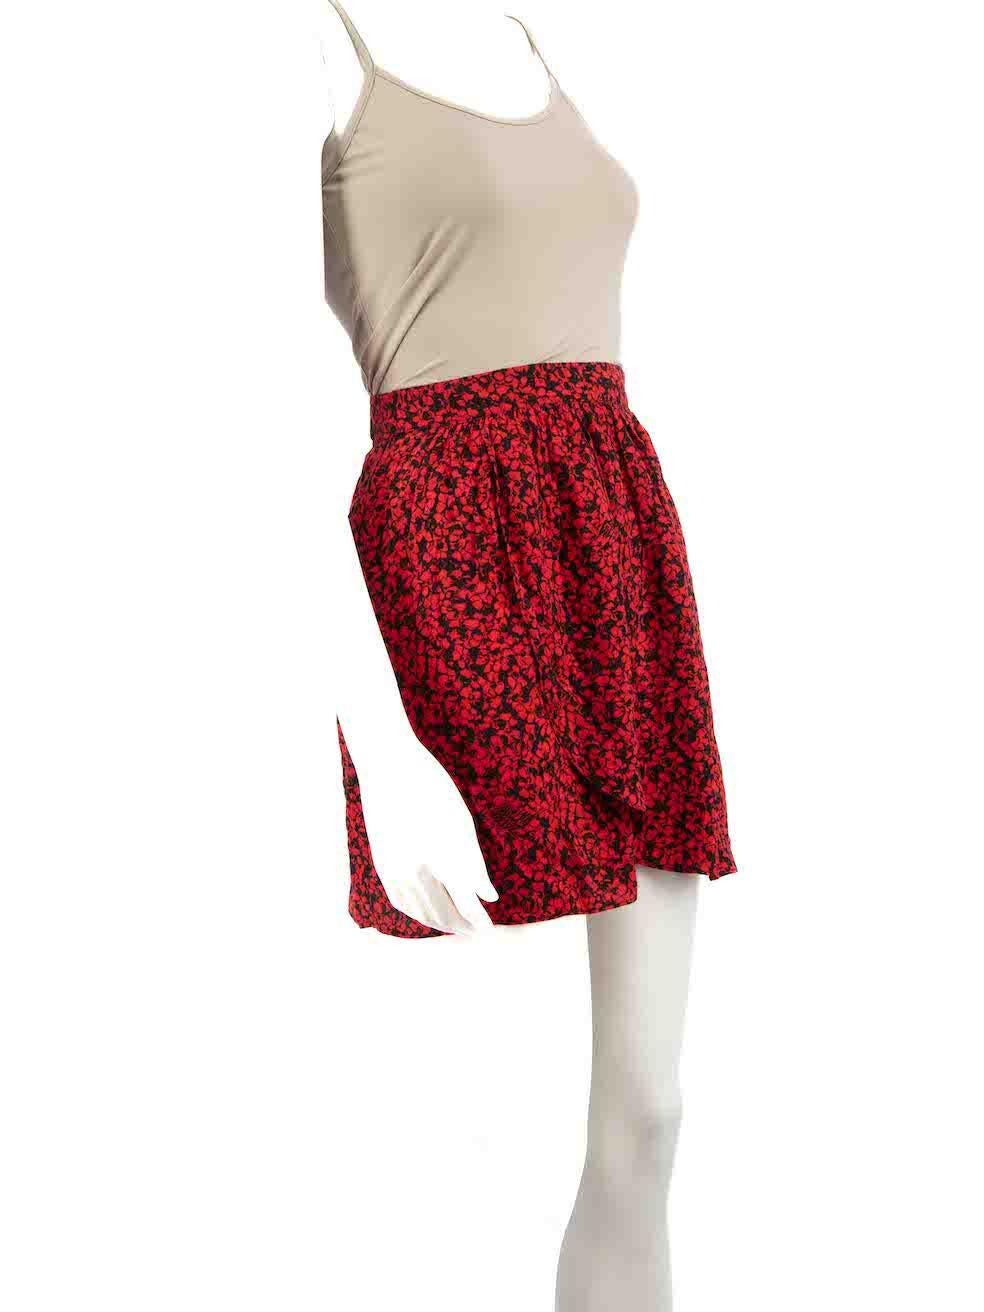 CONDITION is Very good. Hardly any wear to skirt is evident on this Zadig & Voltaire designer resale item.
 
 Details
 Red
 Viscose
 Skirt
 Floral pattern
 Mini
 Elasticated waistband
 2x Side pockets
 
 
 Made in China
 
 Composition
 100% Viscose
